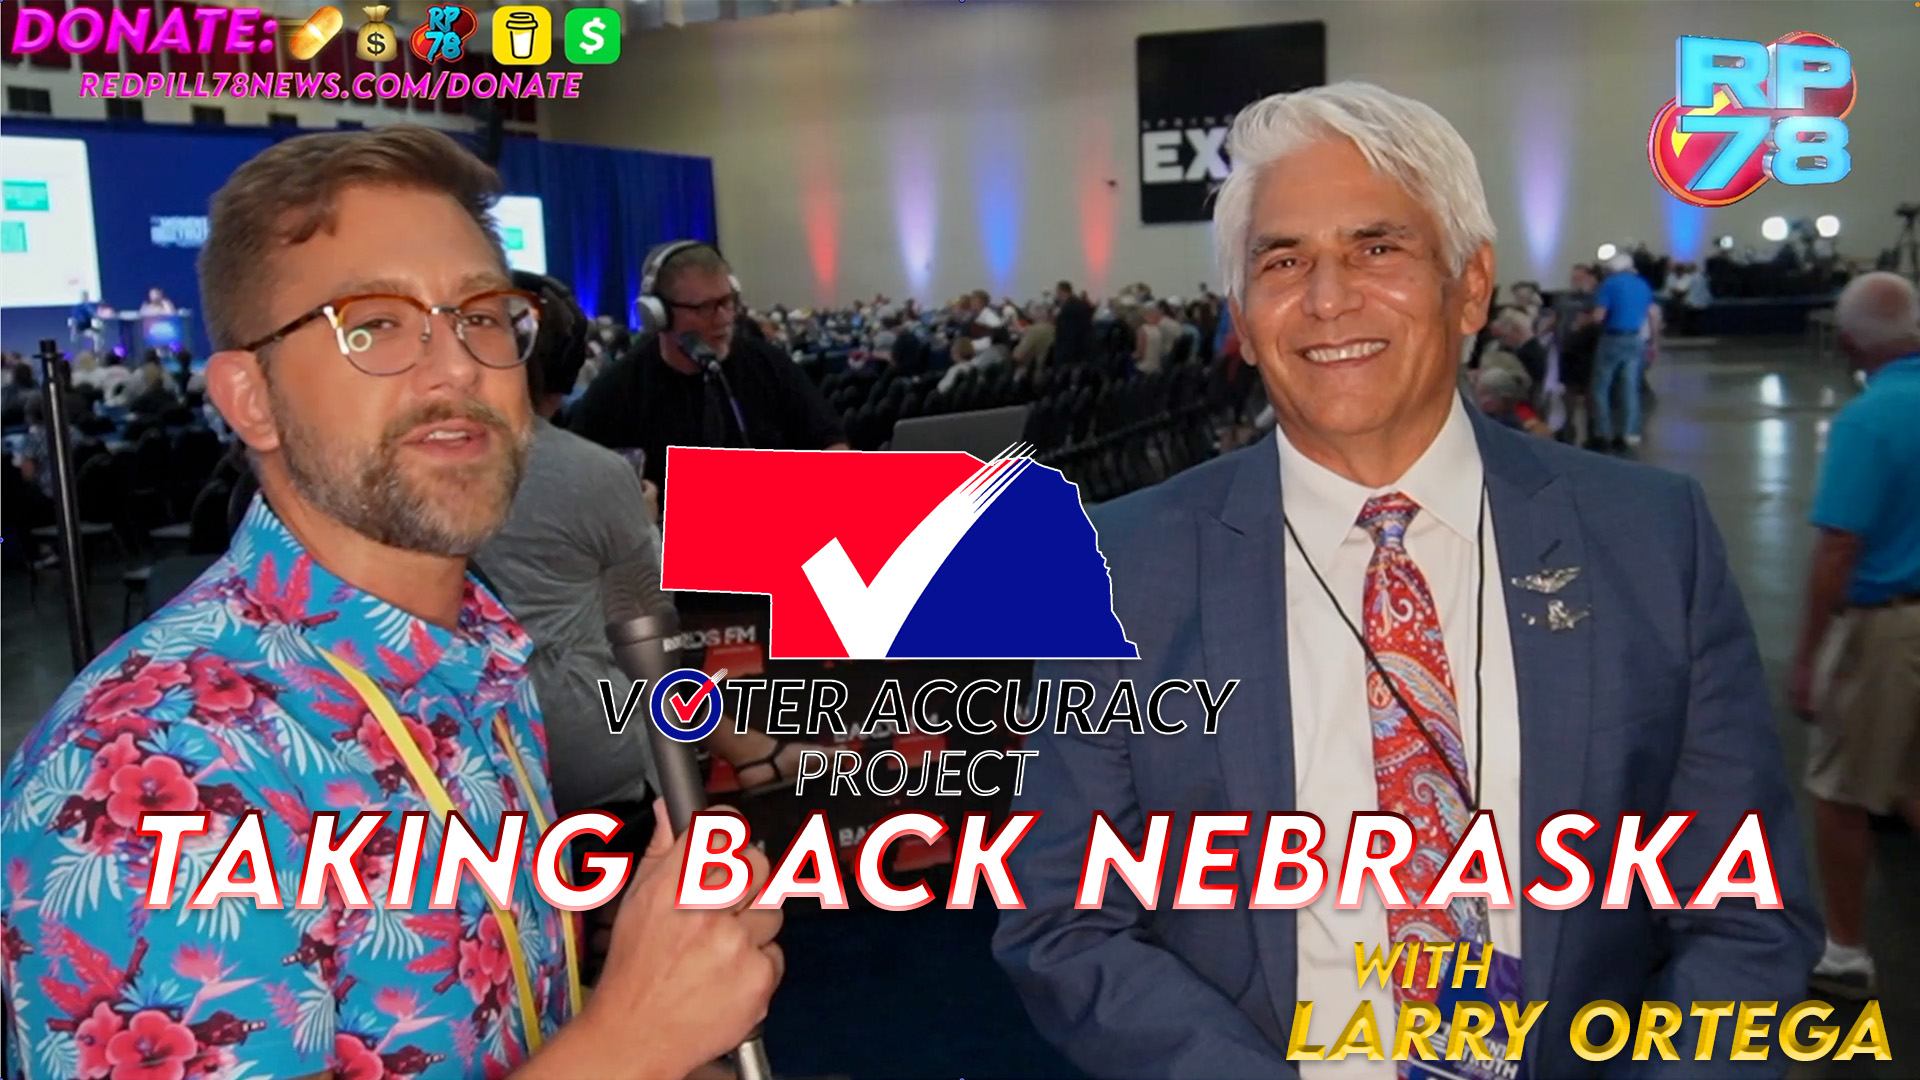 How To Take Back Your Country with Larry Ortega of the Nebraska Voter Accuracy Project